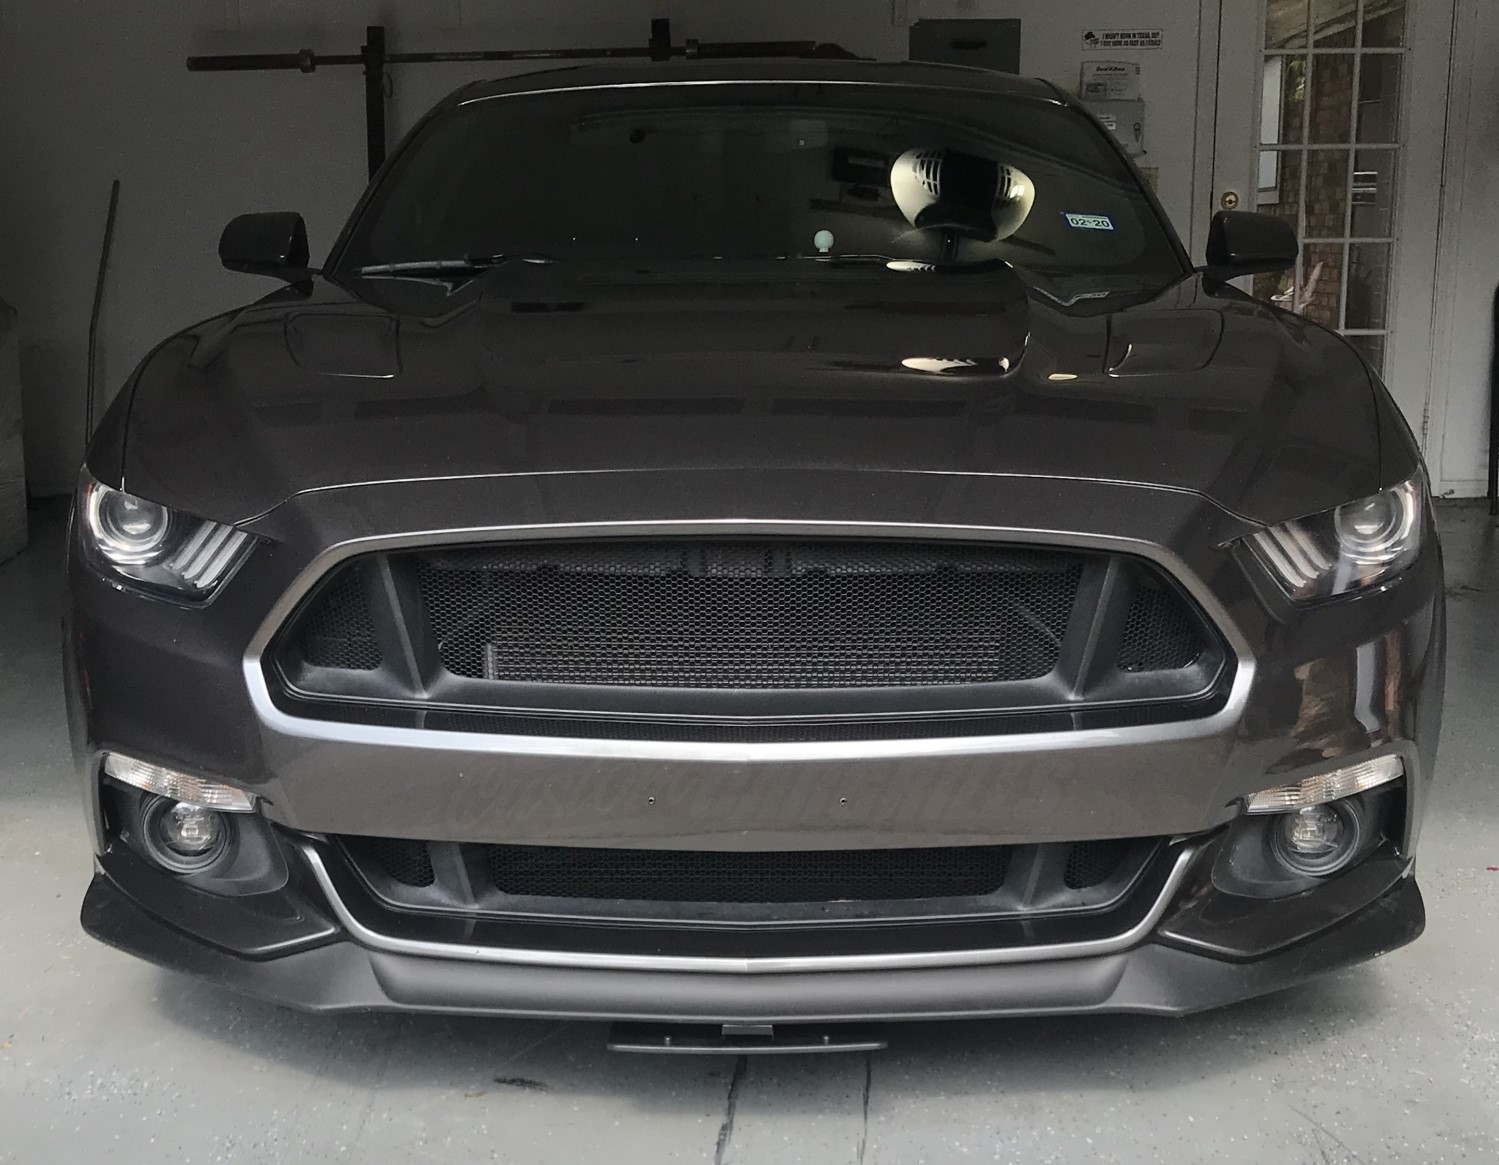 Custom Grille Set for Both Top and Bottom Bumper Sections of 6th Generation Mustang GT